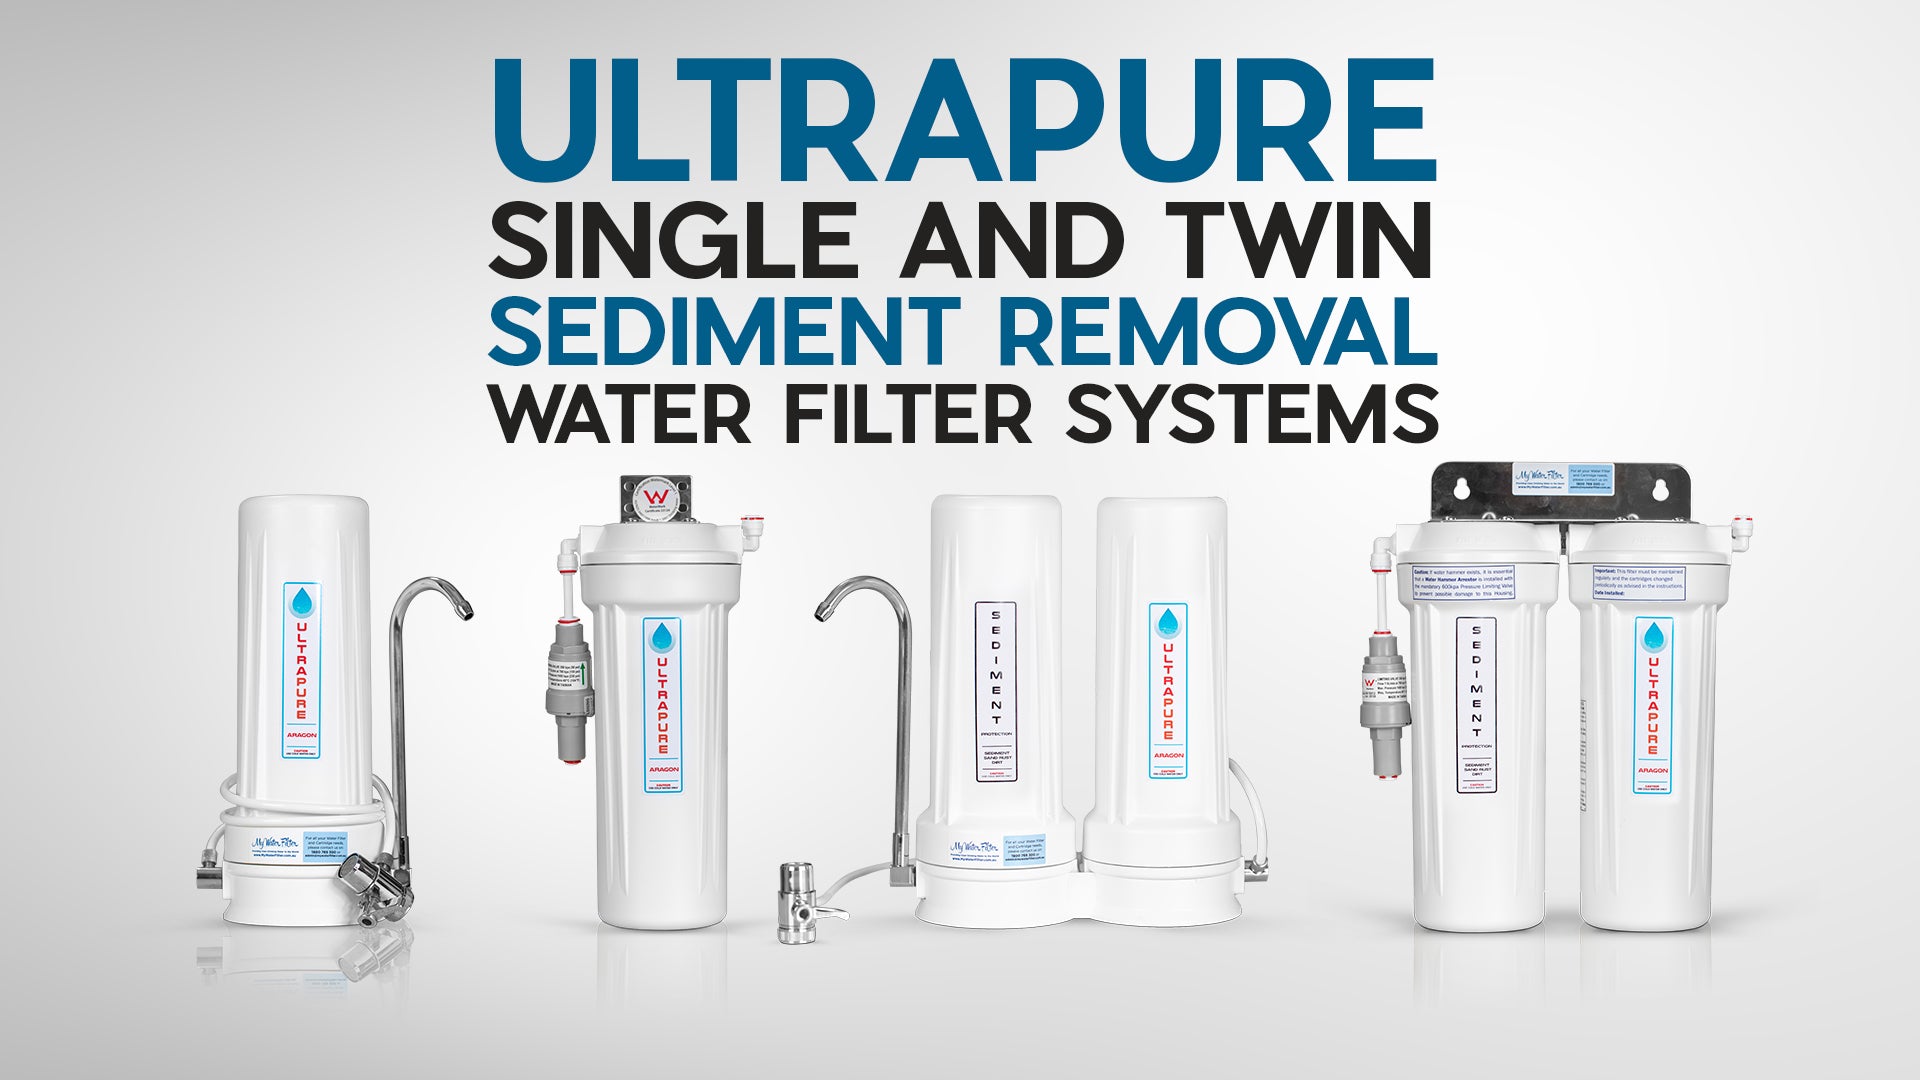 Ultrapure Benchtop and Under Sink Sediment Protection Water Filters